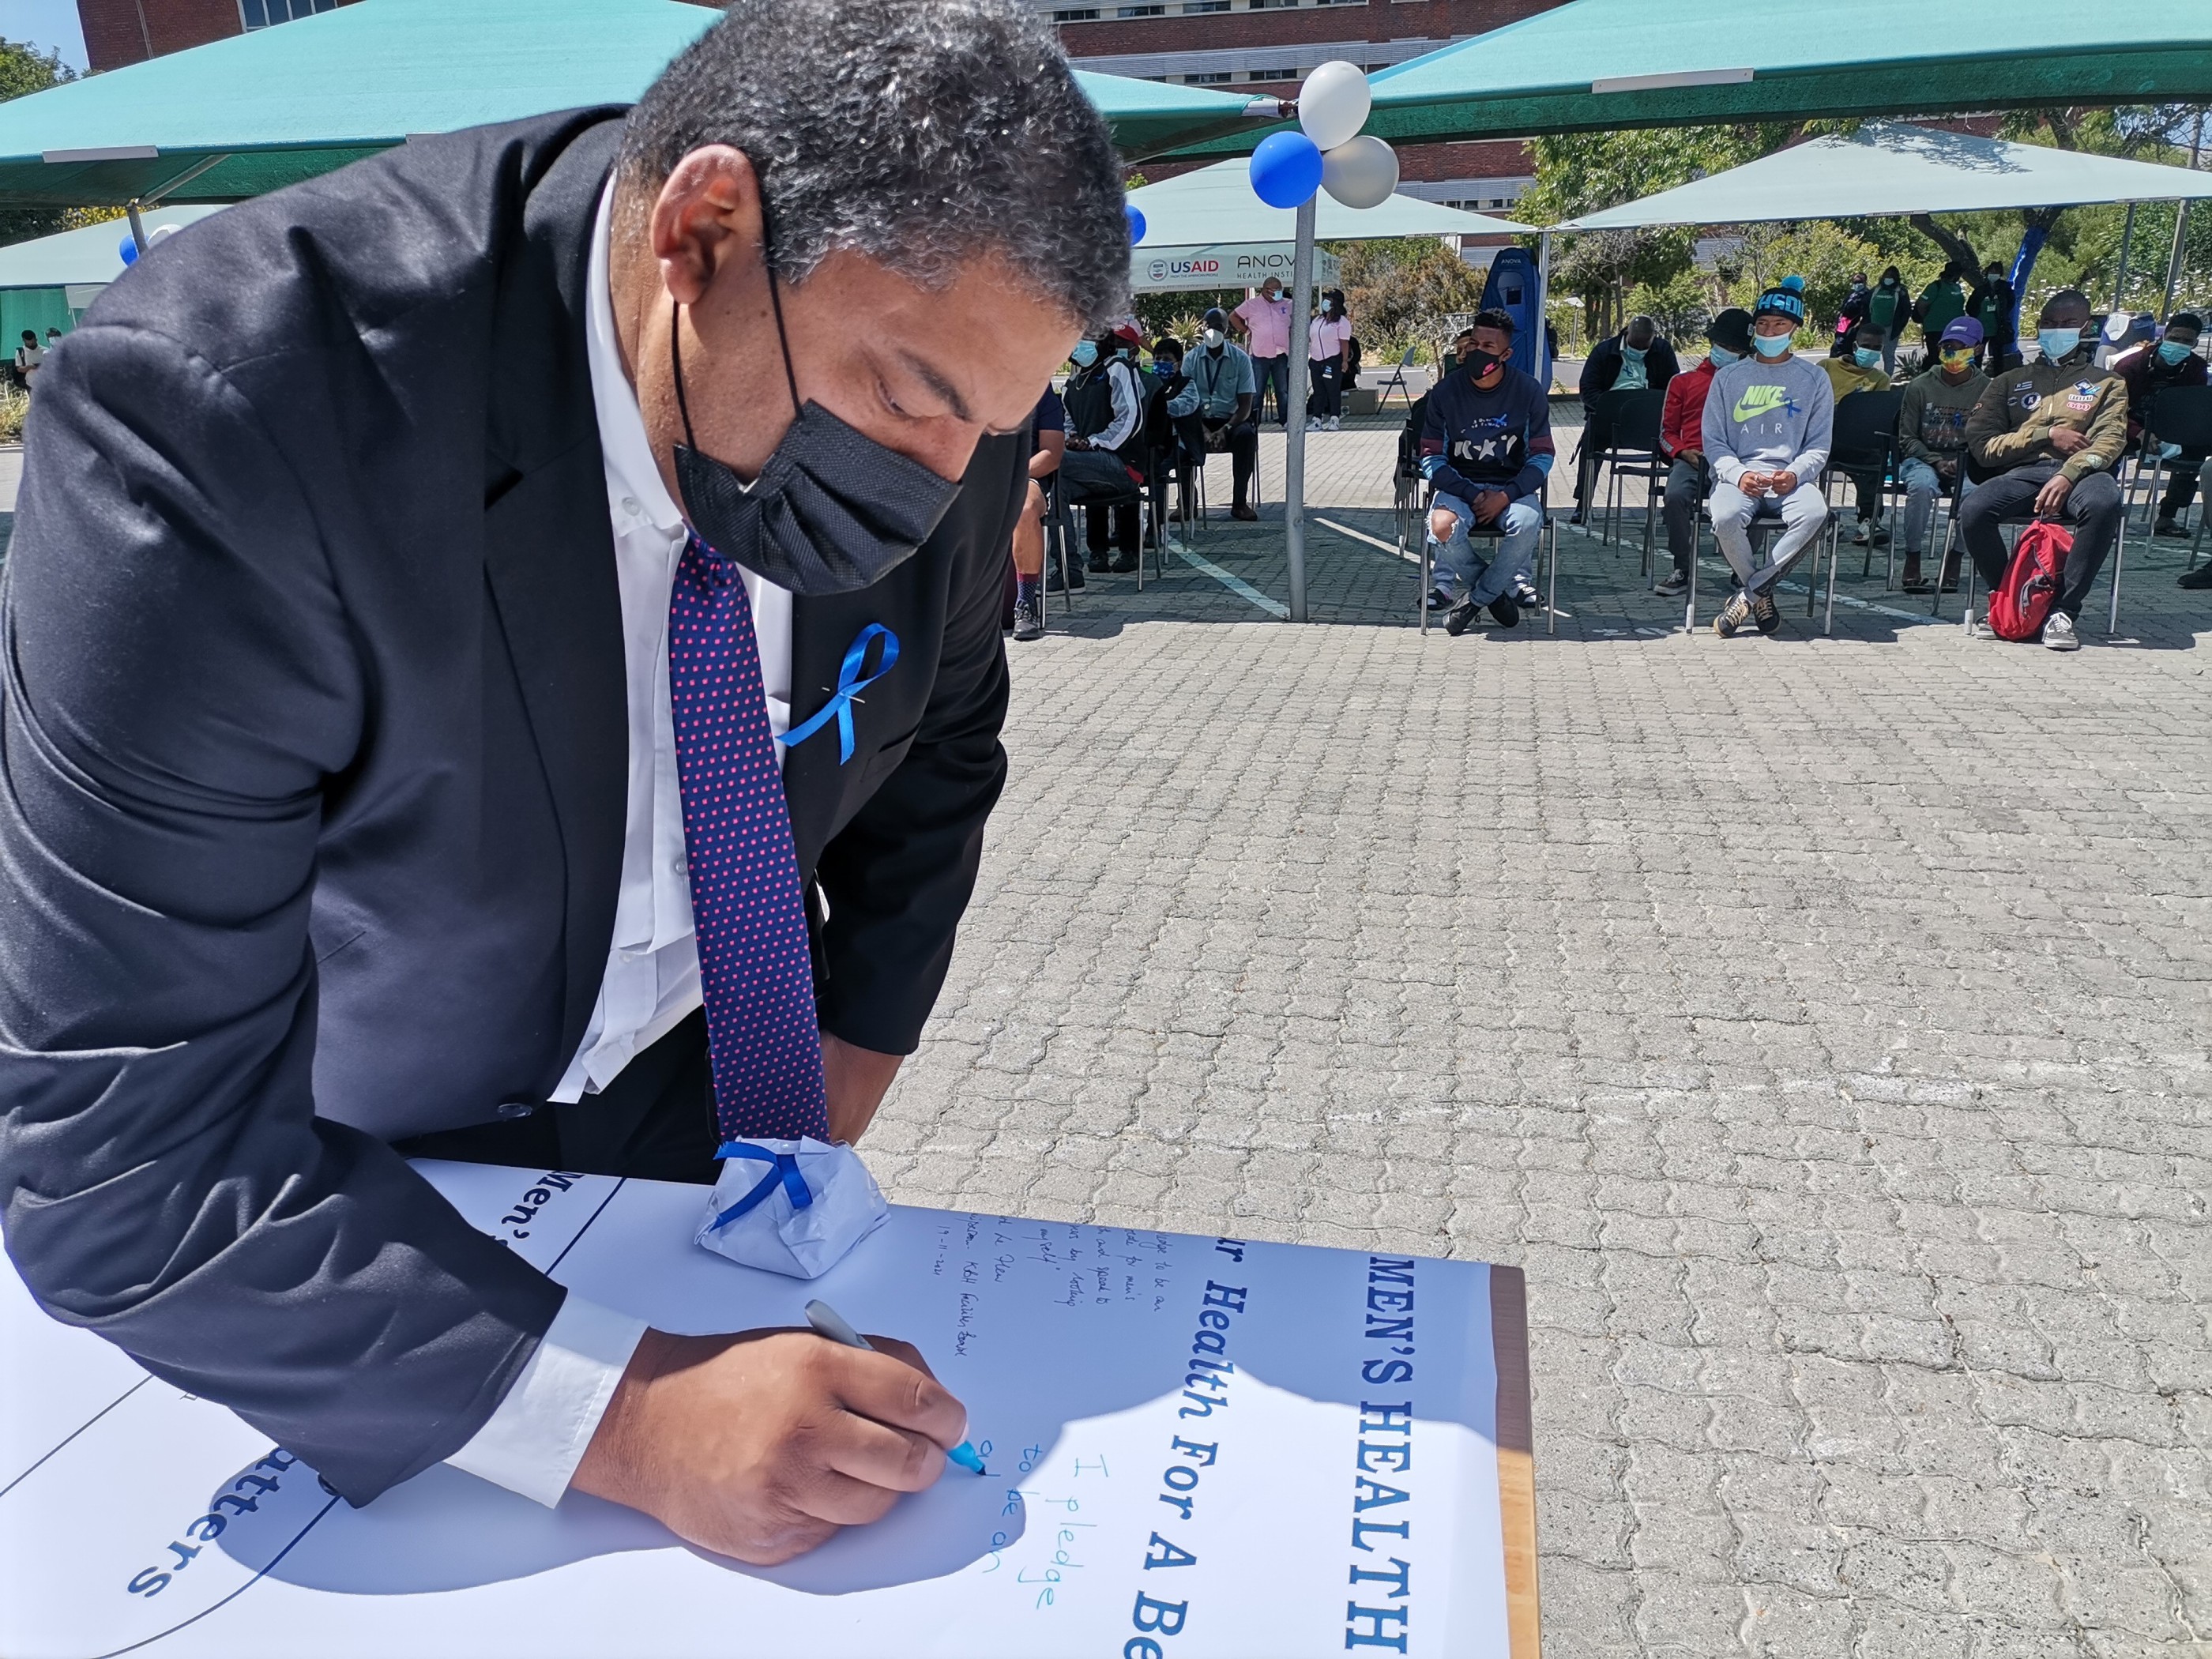 Quinton Adams, educational psychologist, signs the men’s health pledge after addressing young men on their role in society.